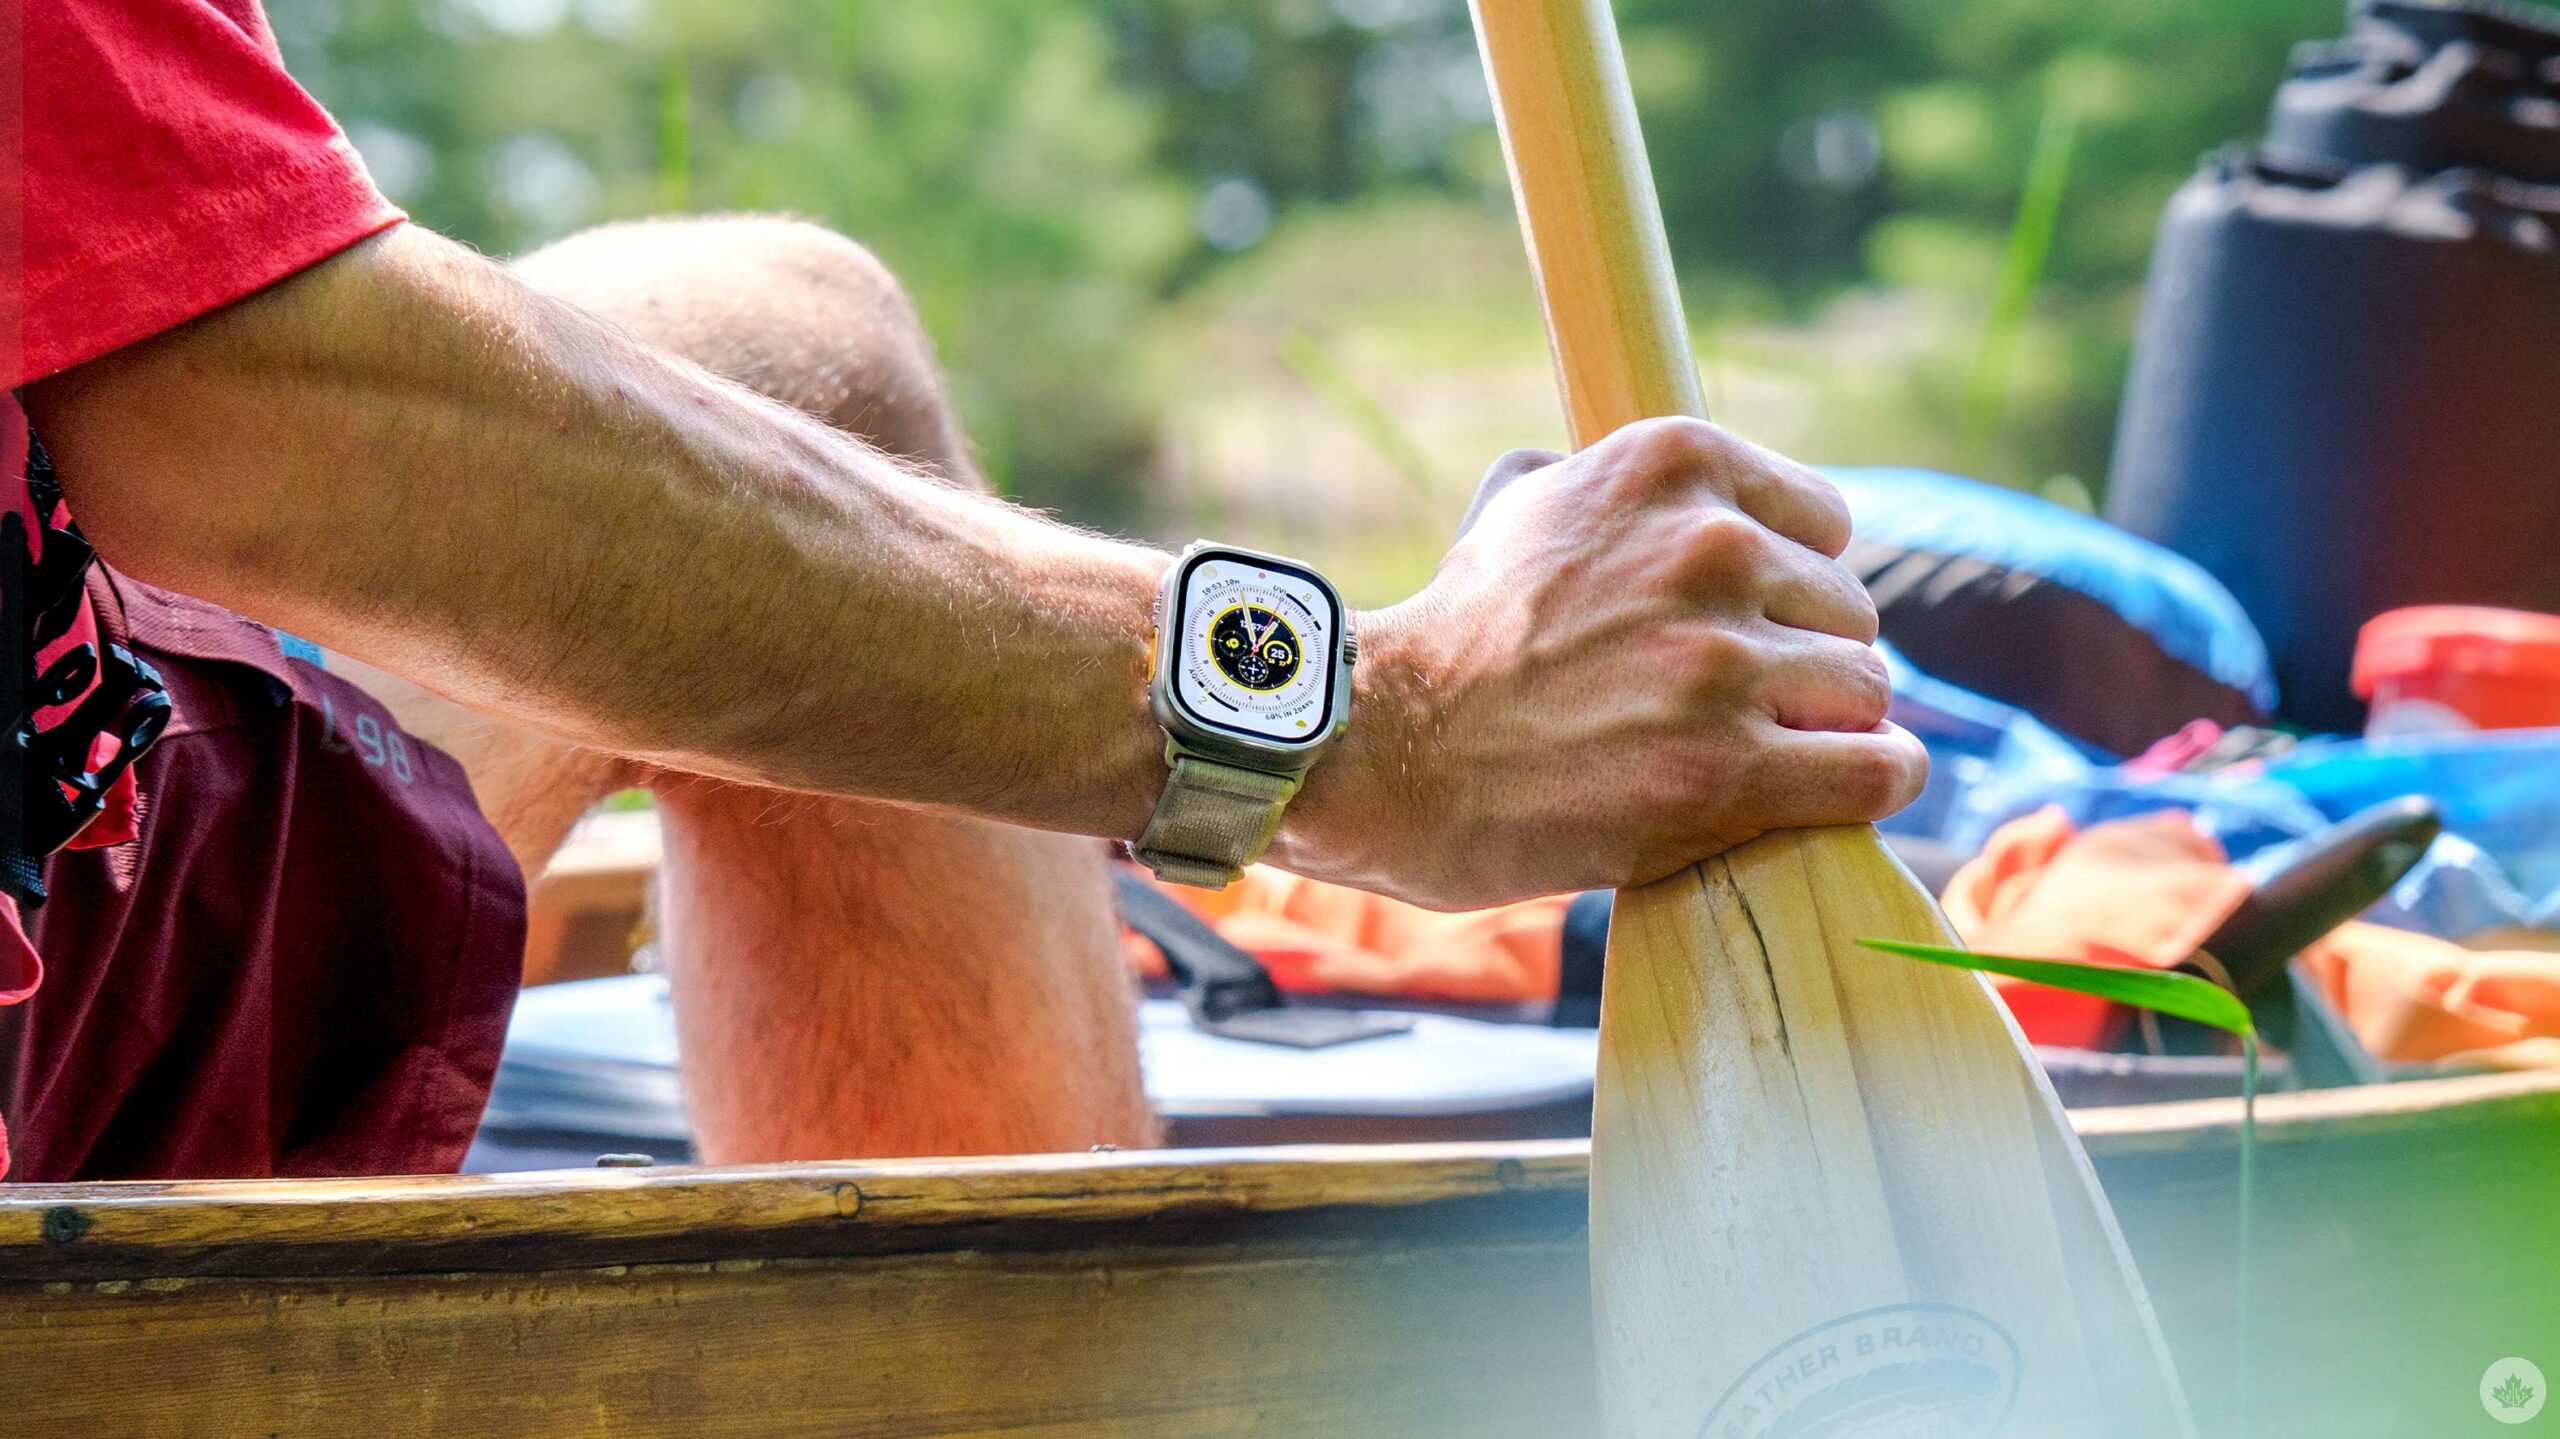 Taking the Apple Watch Ultra to the Canadian backcountry